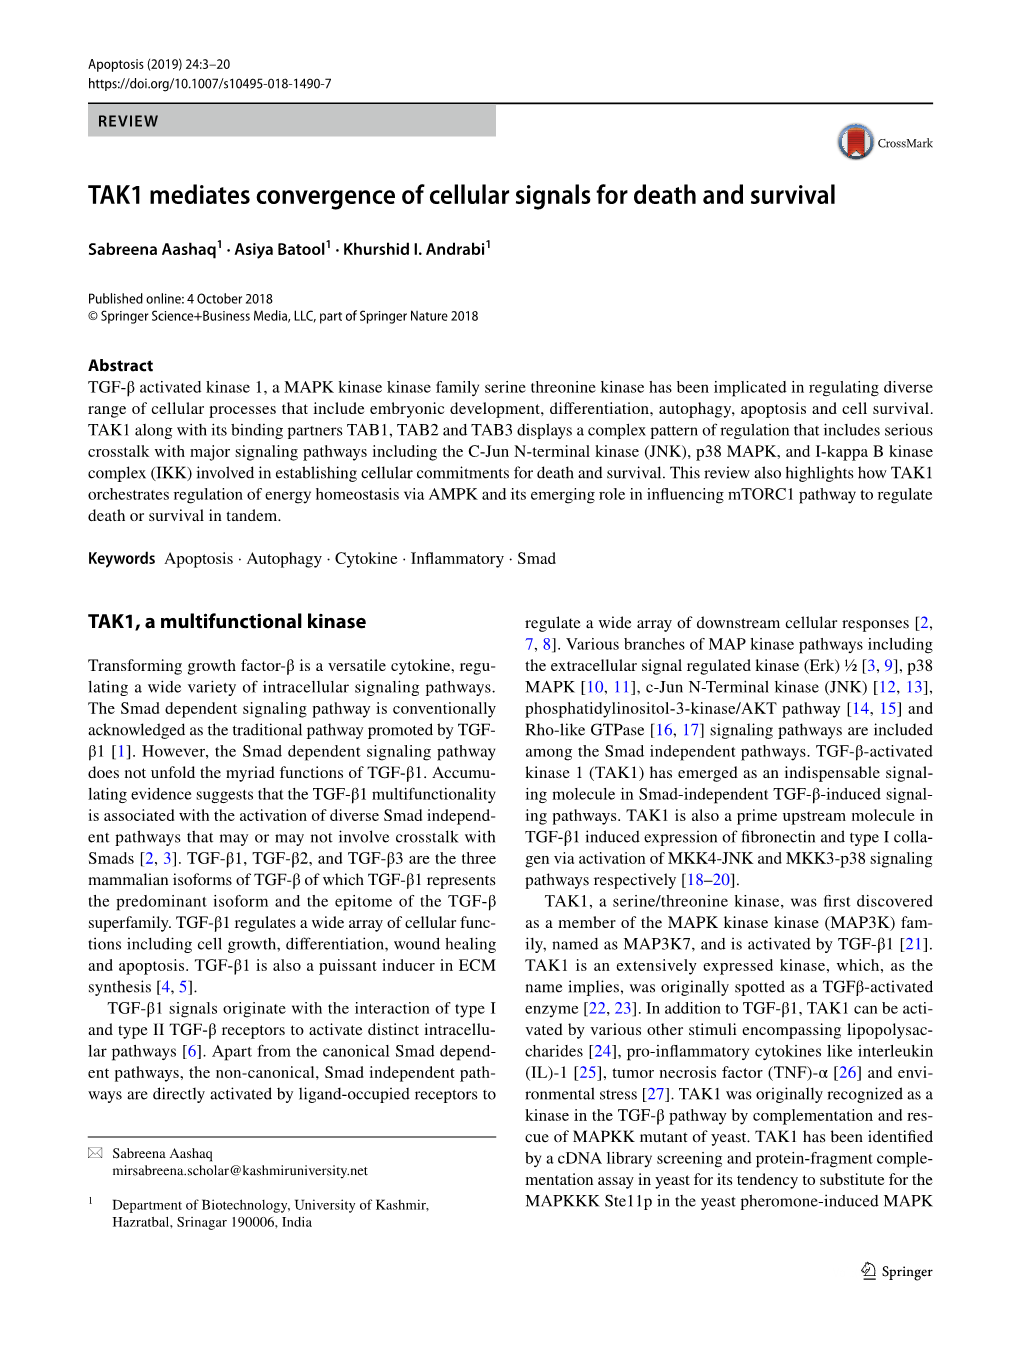 TAK1 Mediates Convergence of Cellular Signals for Death and Survival